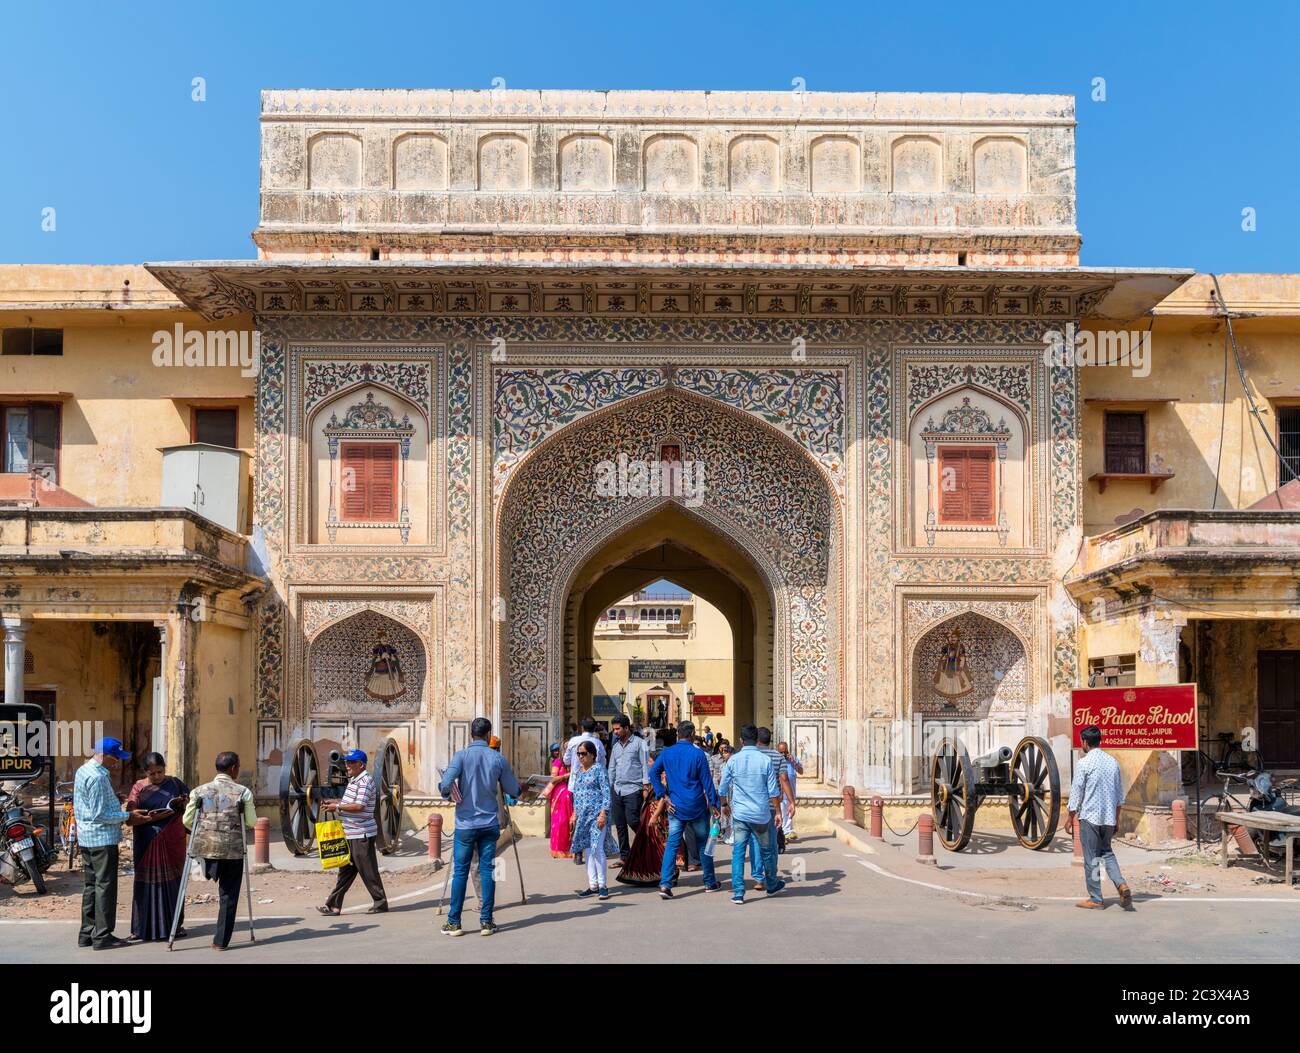 Entrance to the City Palace complex, the Old City, Jaipur, Rajasthan, India Stock Photo